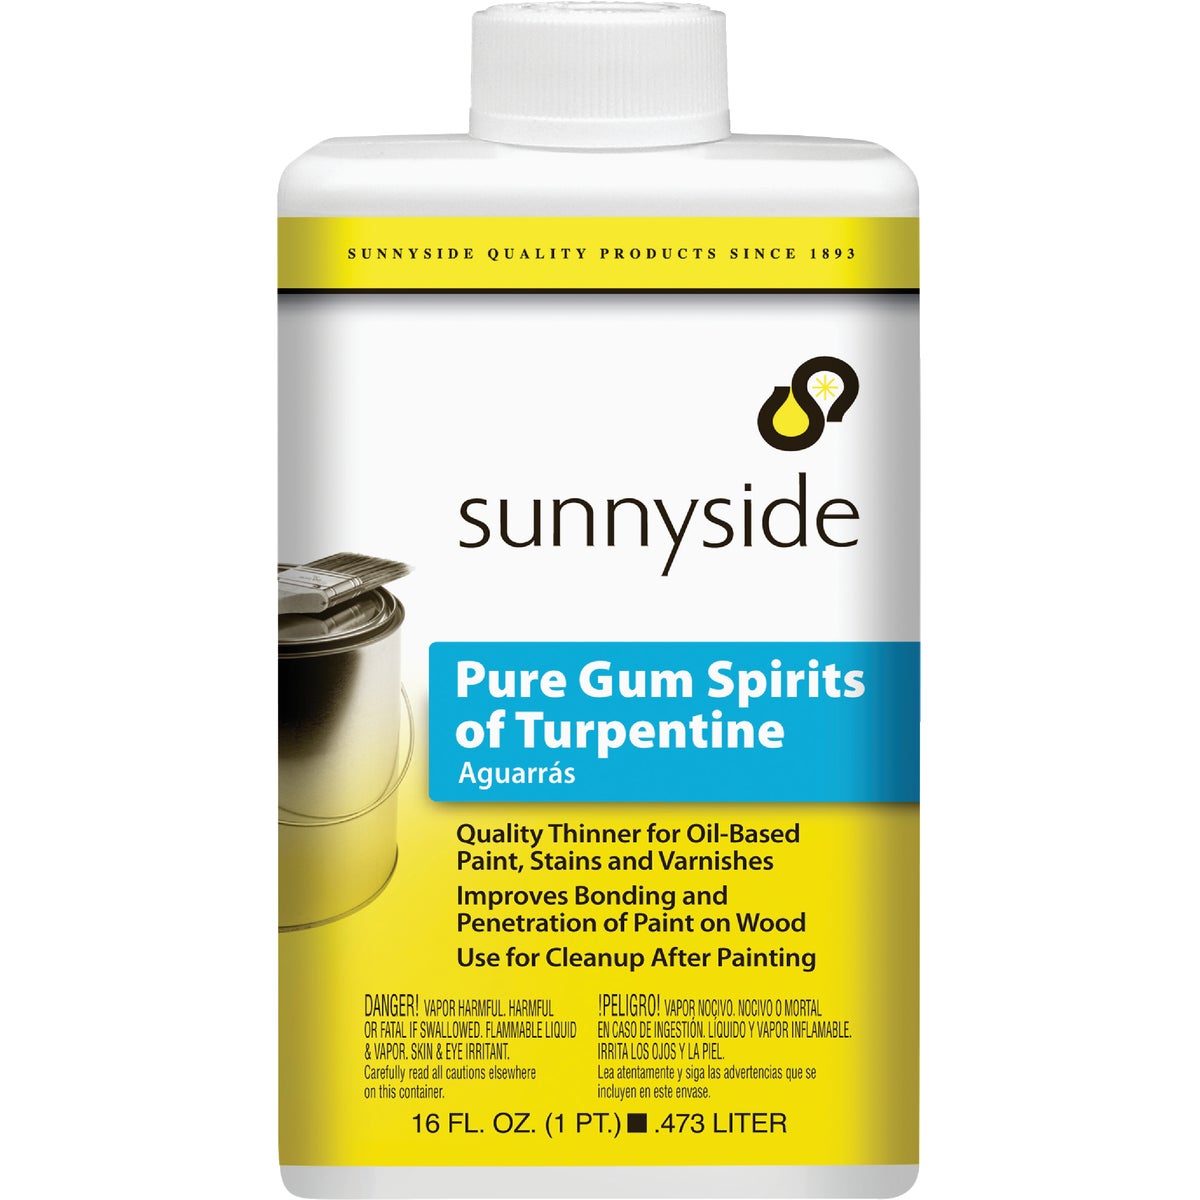 Item 775646, Turpentine is distilled from pine tree resins to create a superior, natural